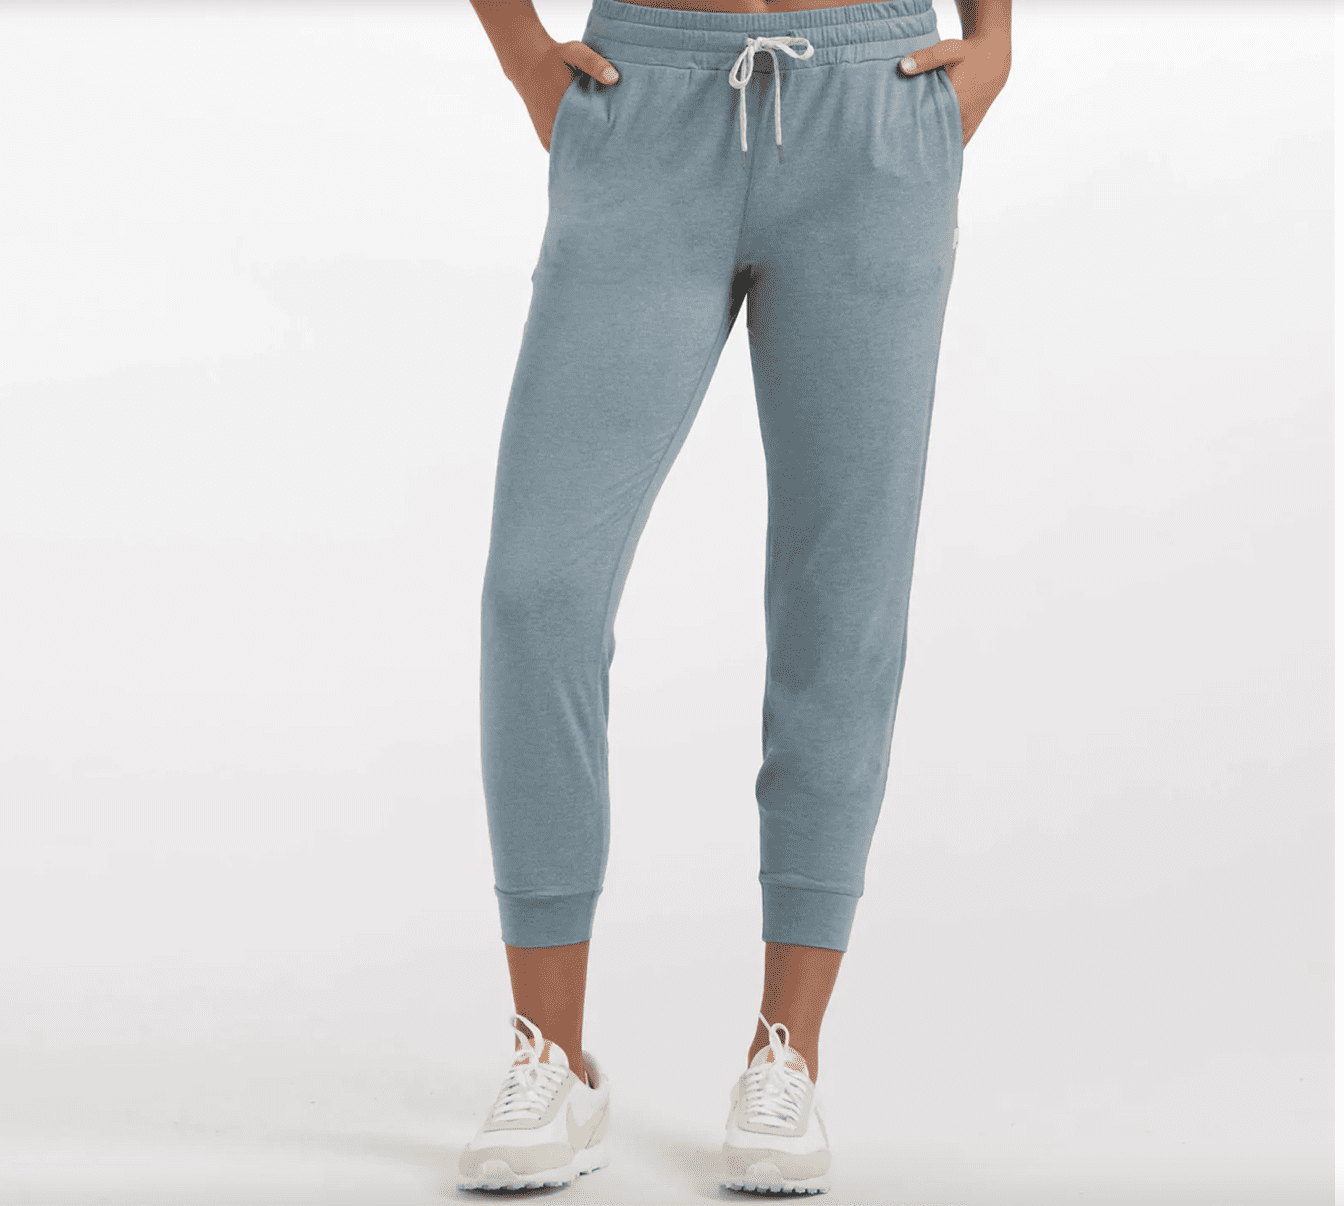 Who makes the best joggers for women